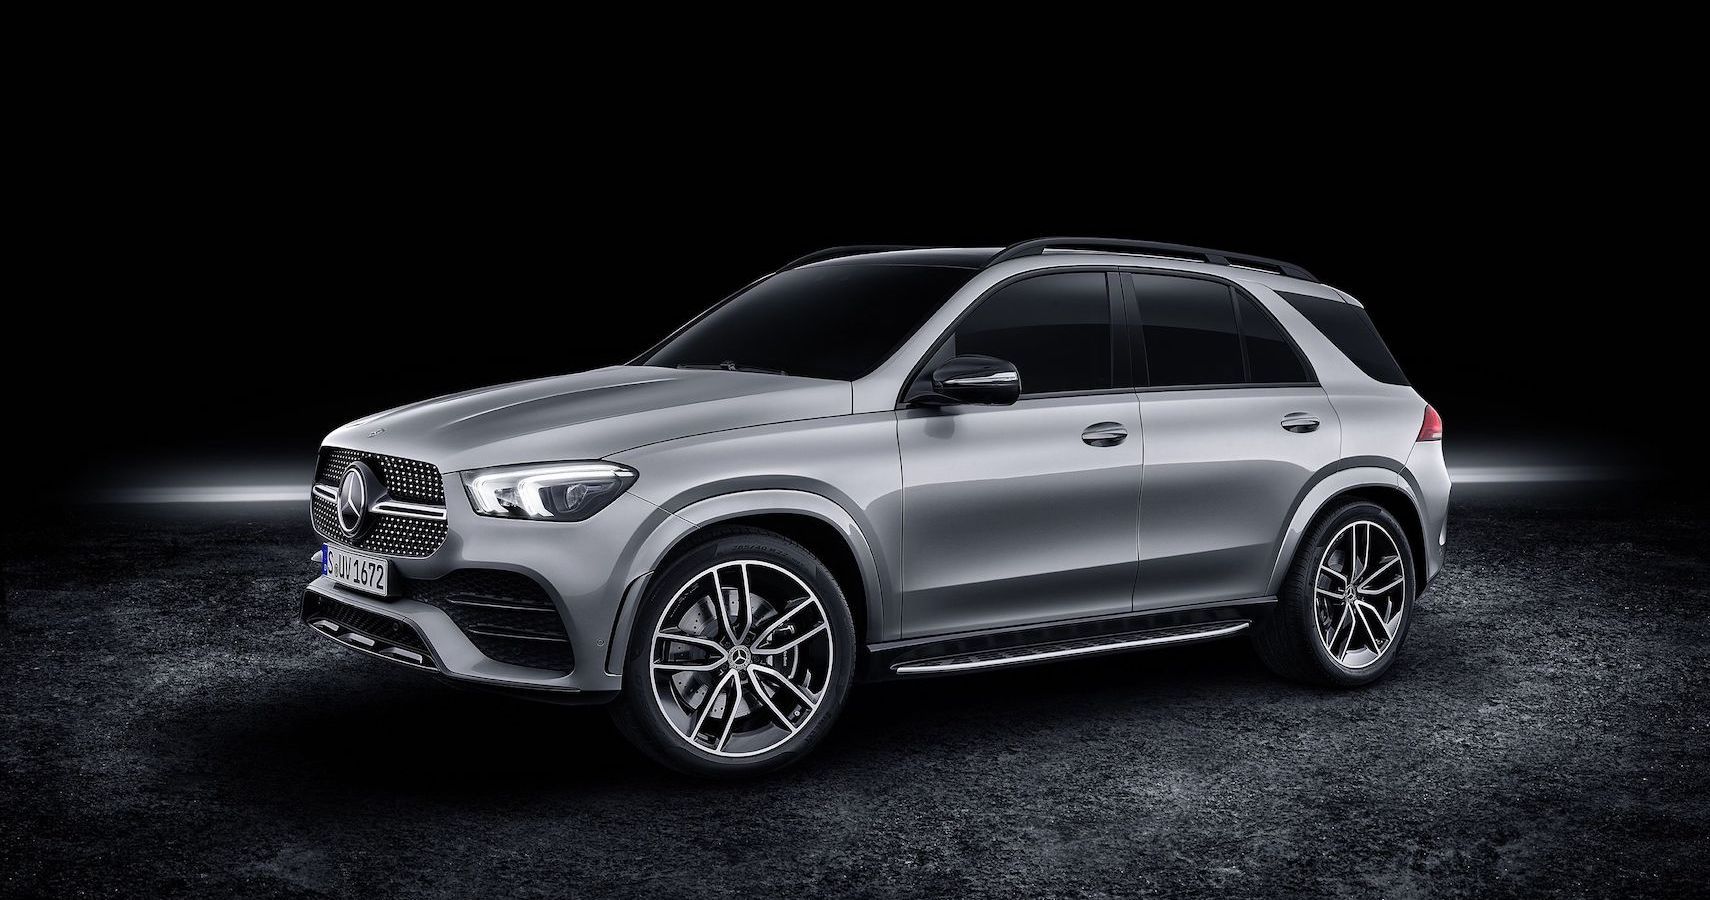 This Is What Makes The Mercedes Benz GLE 580 An Excellent Midsize Luxury SUV